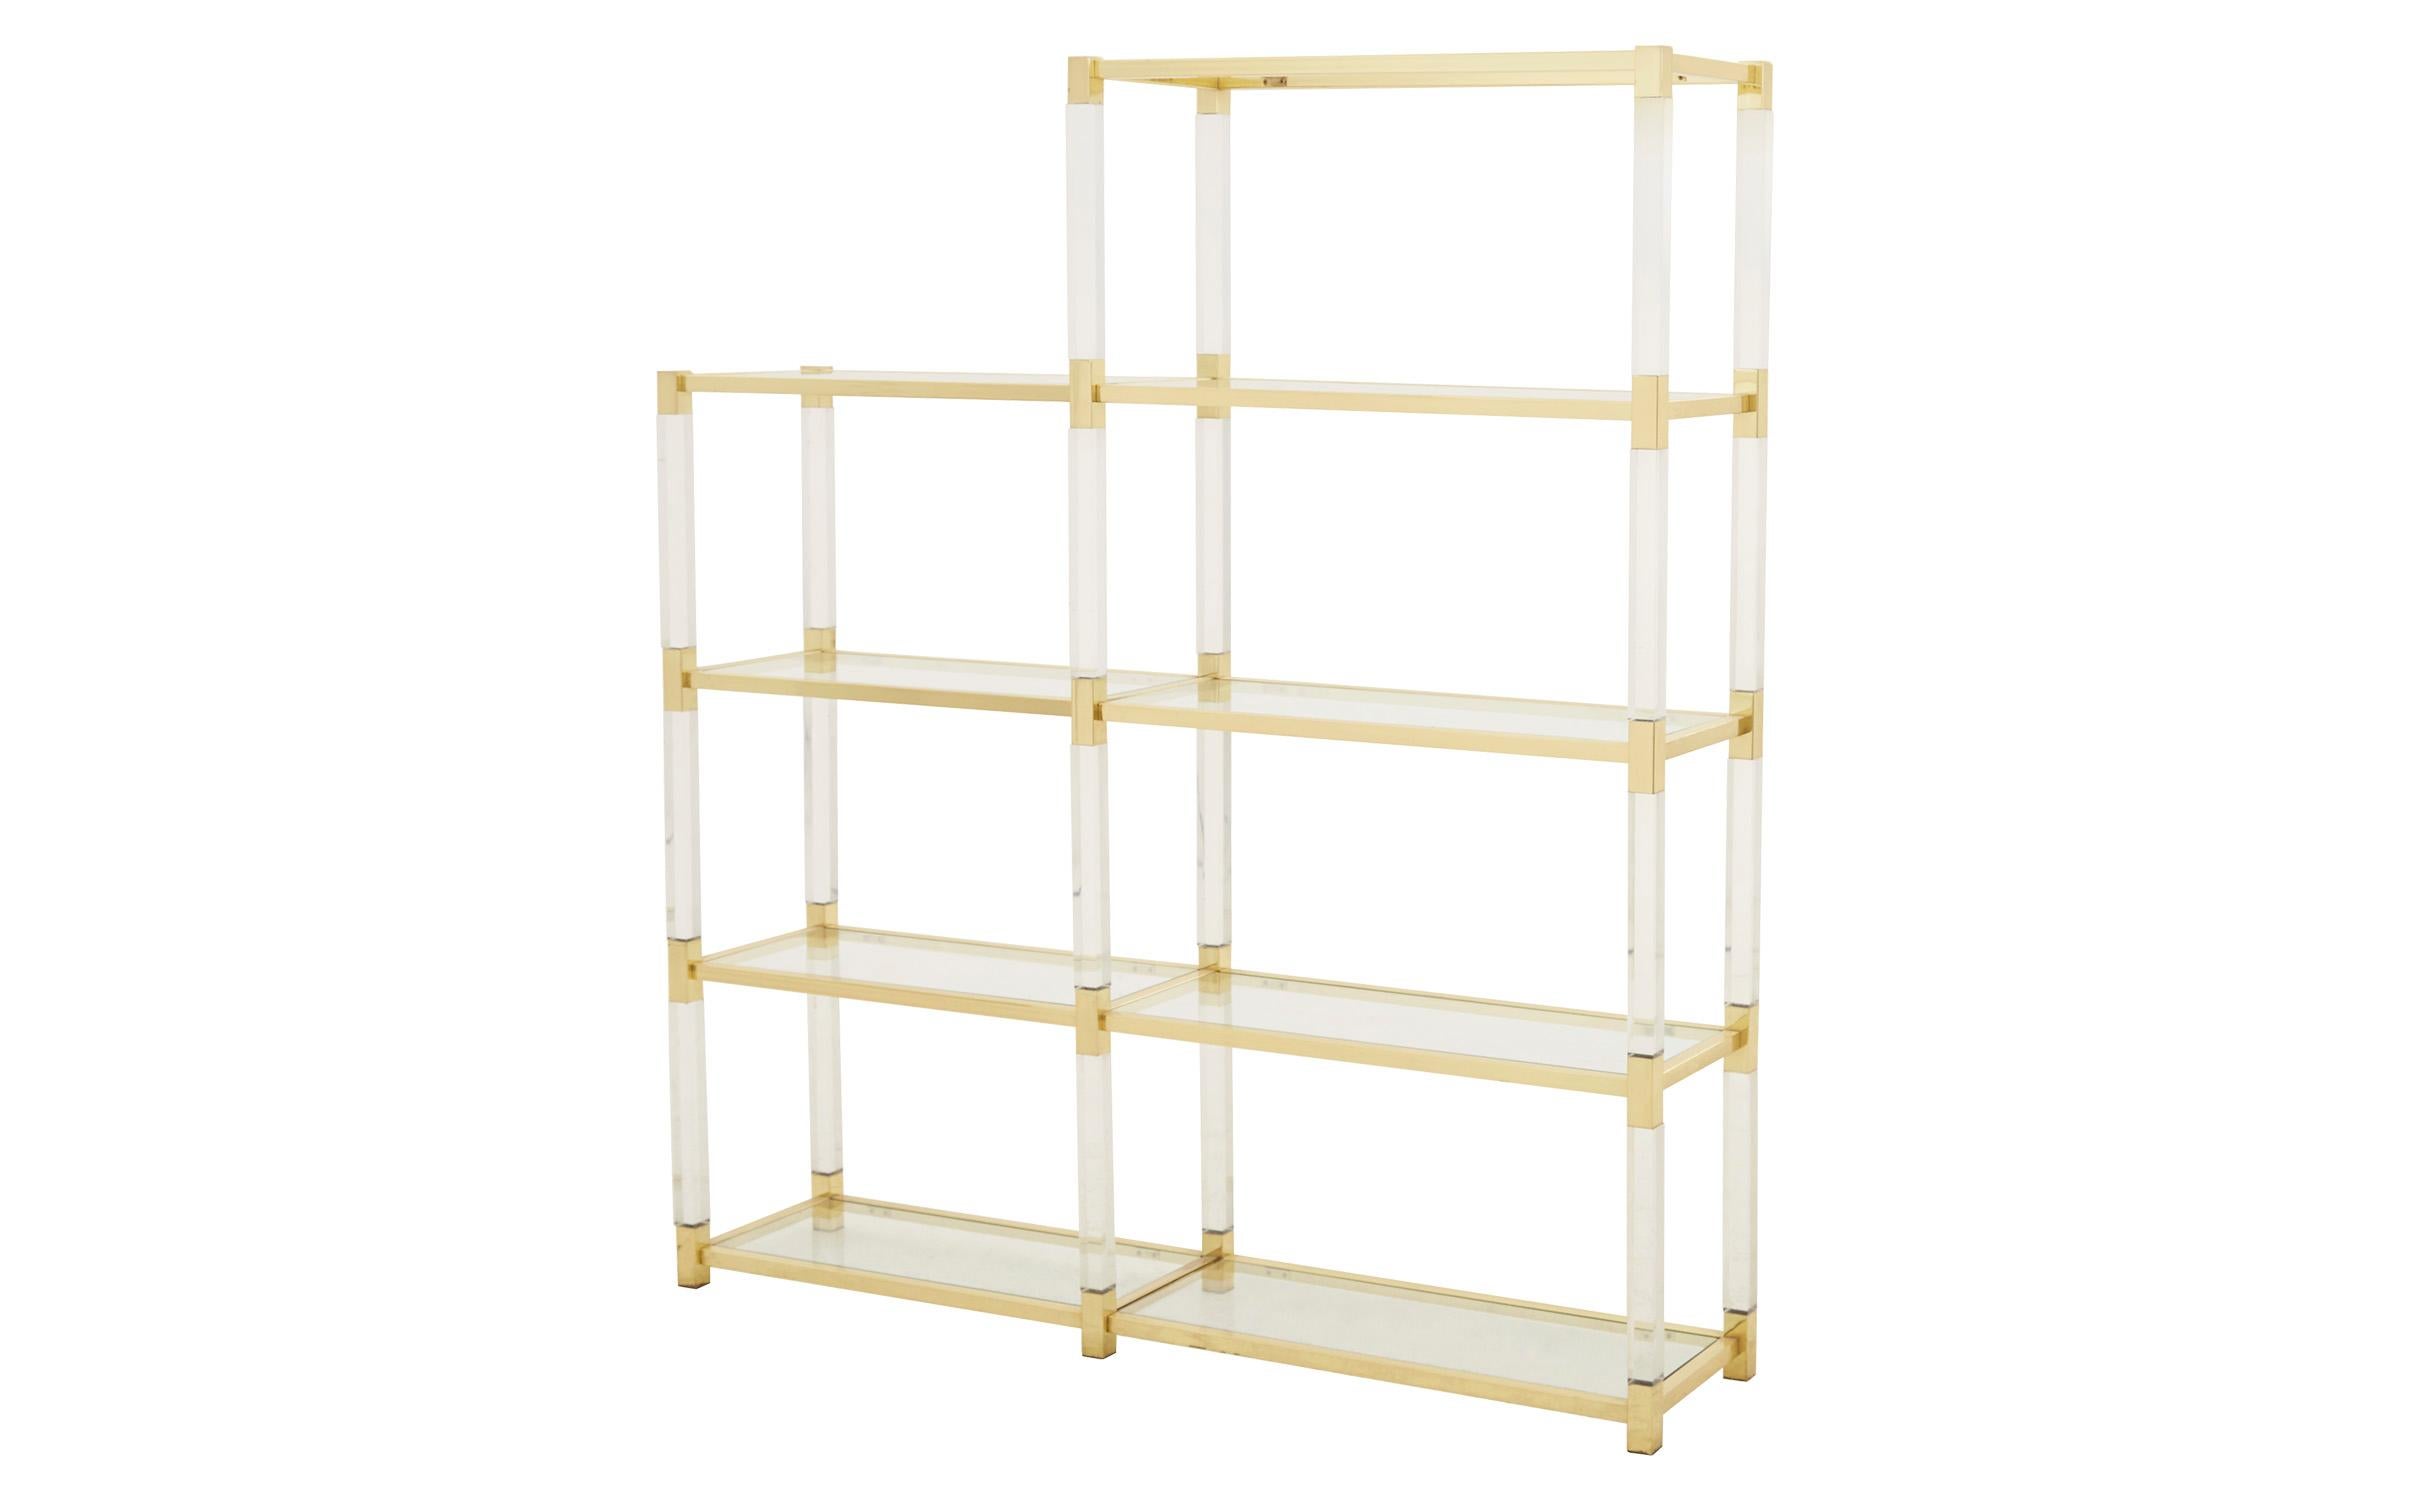 A relic of Hollywood Regency design, our Vintage Brass & Lucite Etagere was crafted in Spain in the mid-20th century. It features its original glass shelves, paired with a brass and lucite frame. This shelf is in excellent vintage condition, with